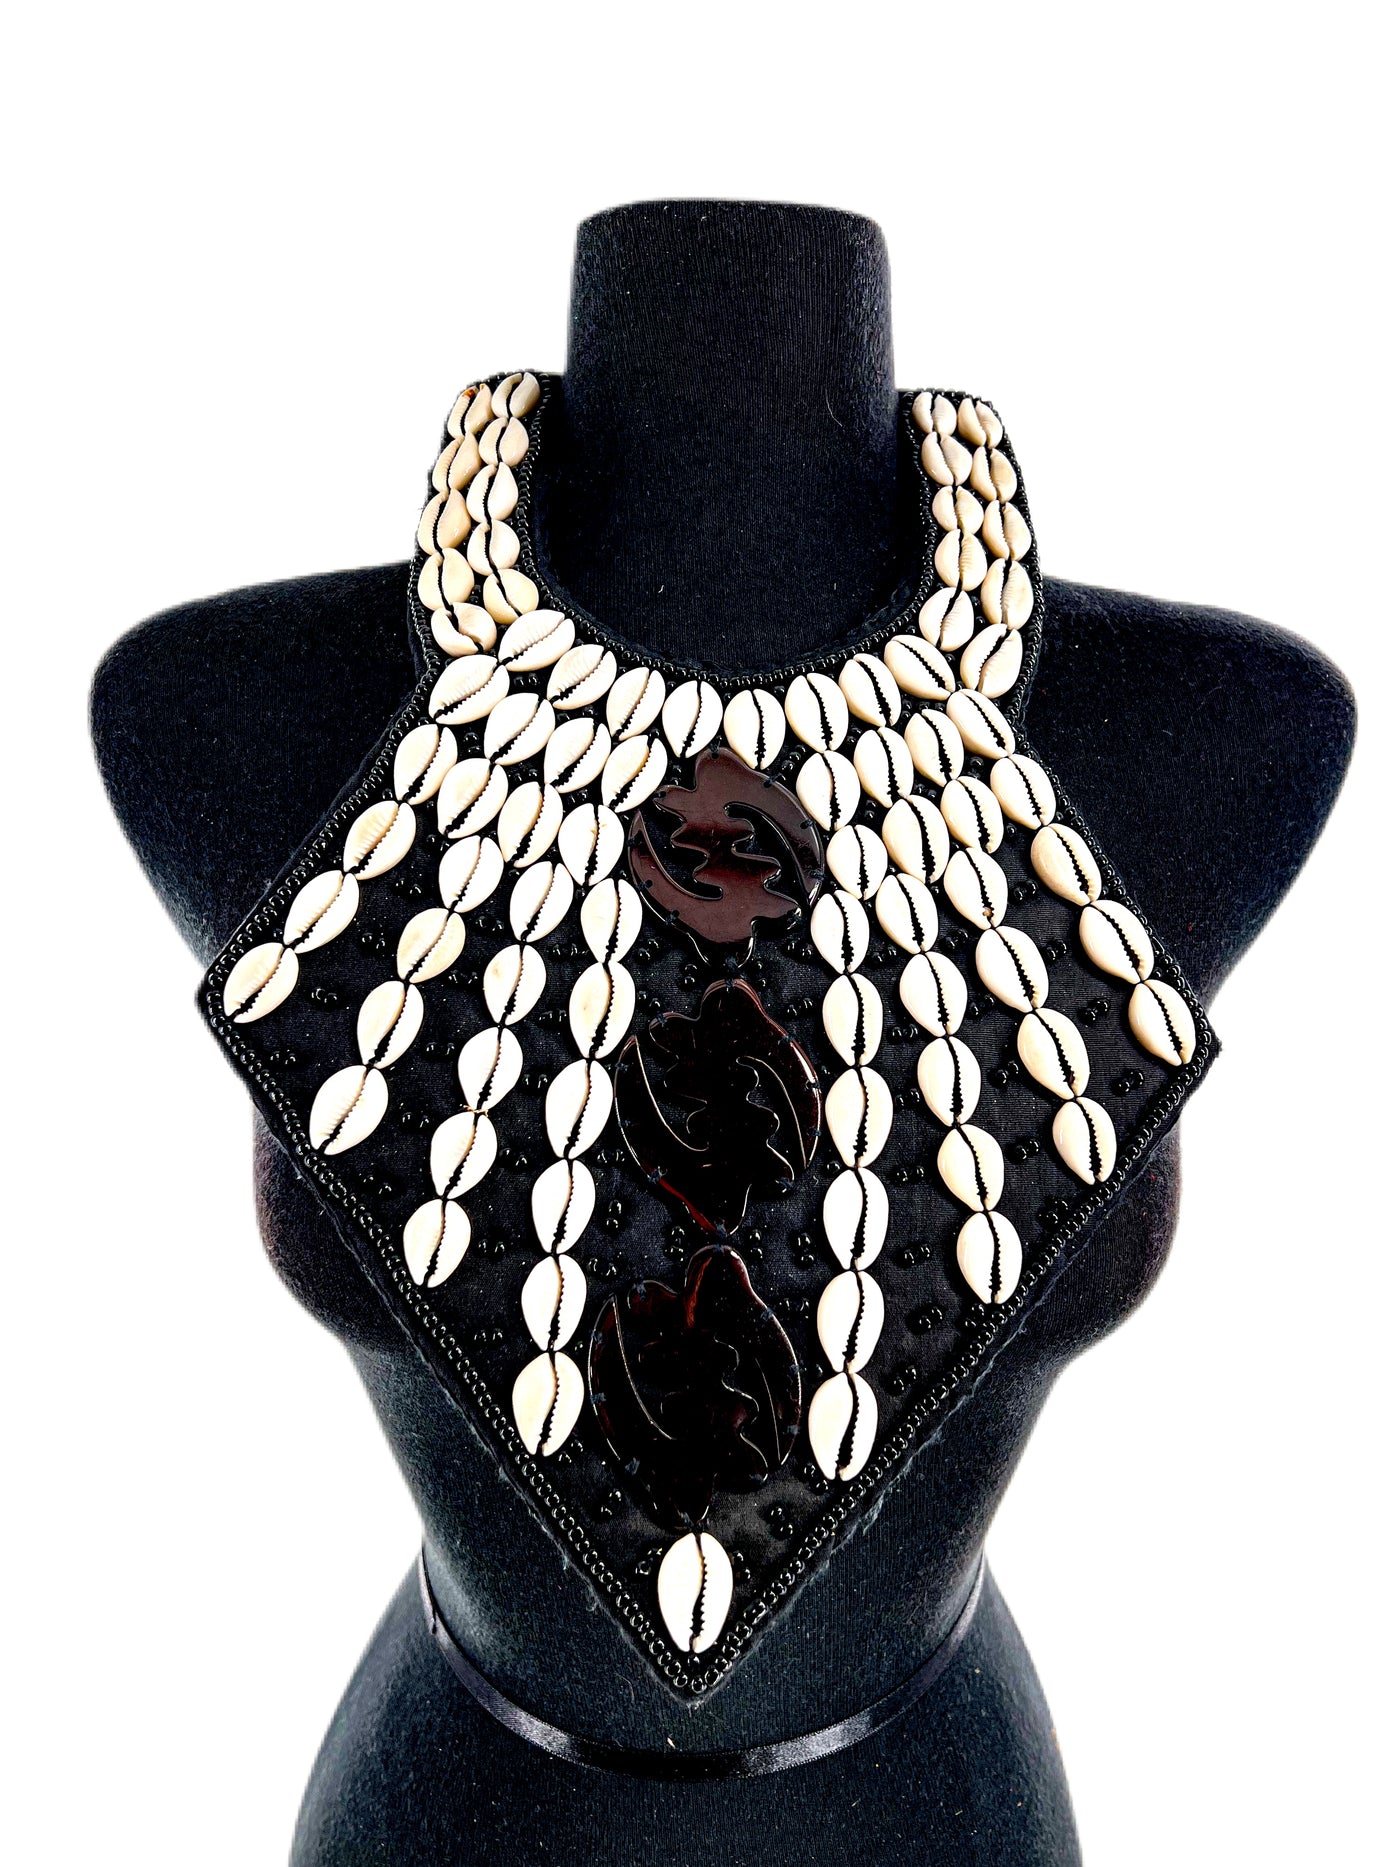 Sample: Gye Nyame (only God) cowry beaded necklace